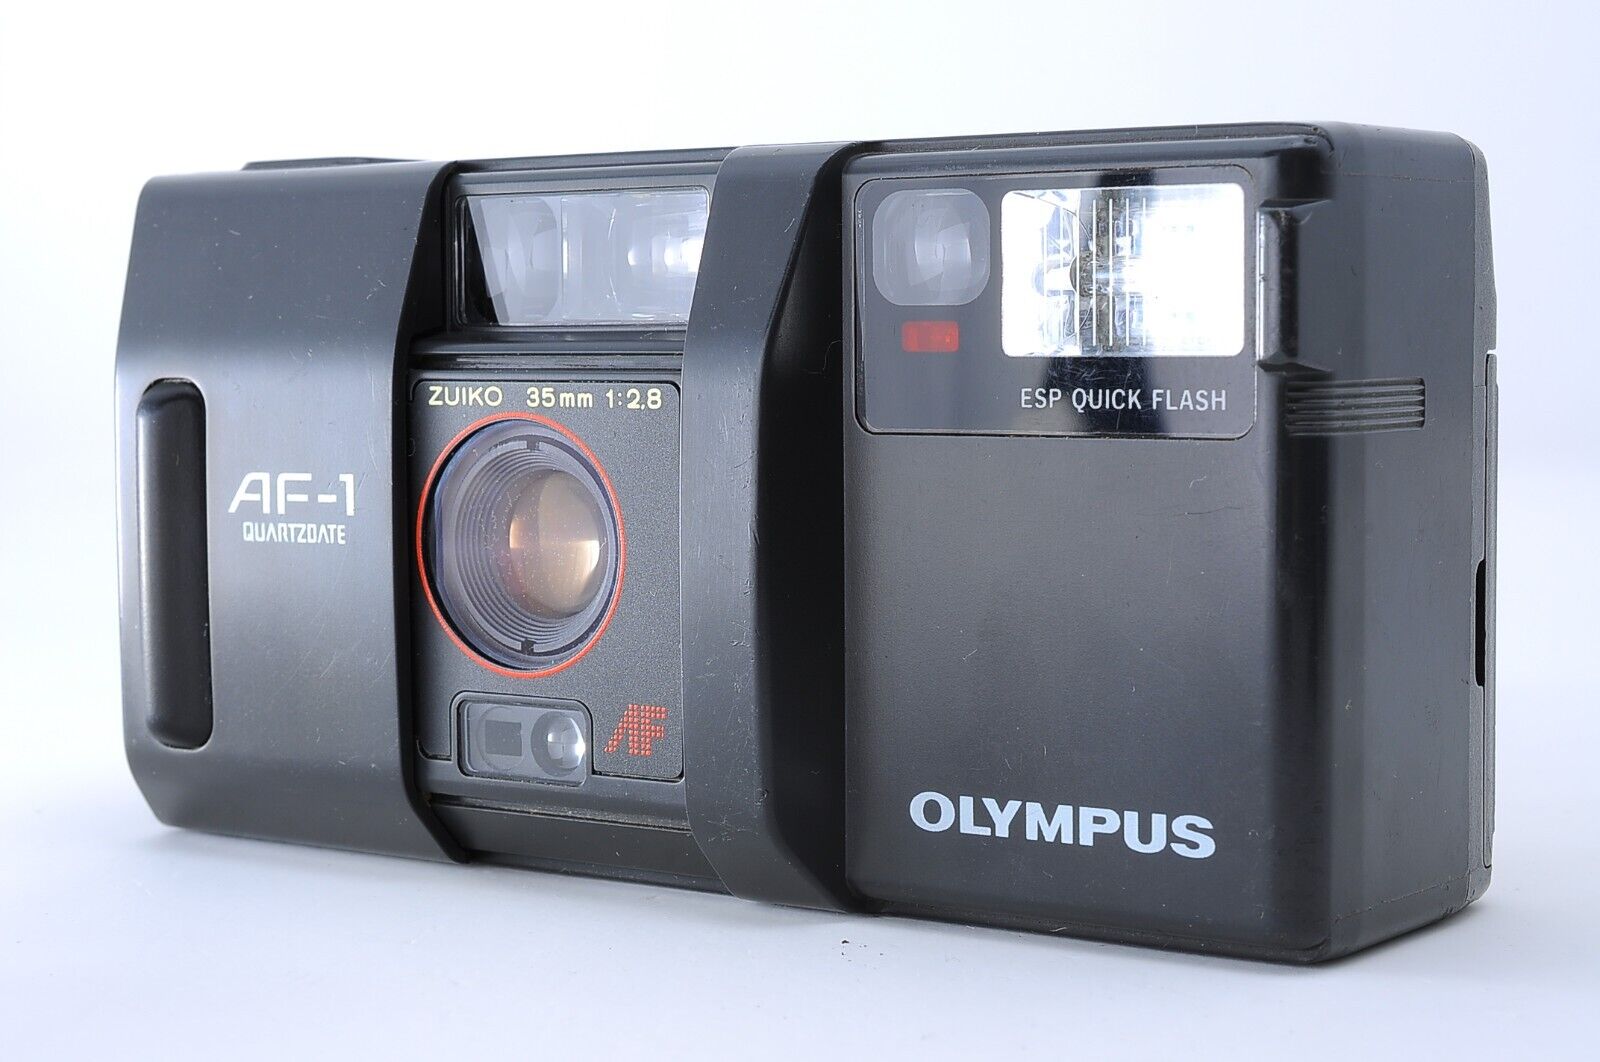 [Near Mint] Olympus AF-1 Point & Shoot 35mm Film Camera Black From Japan